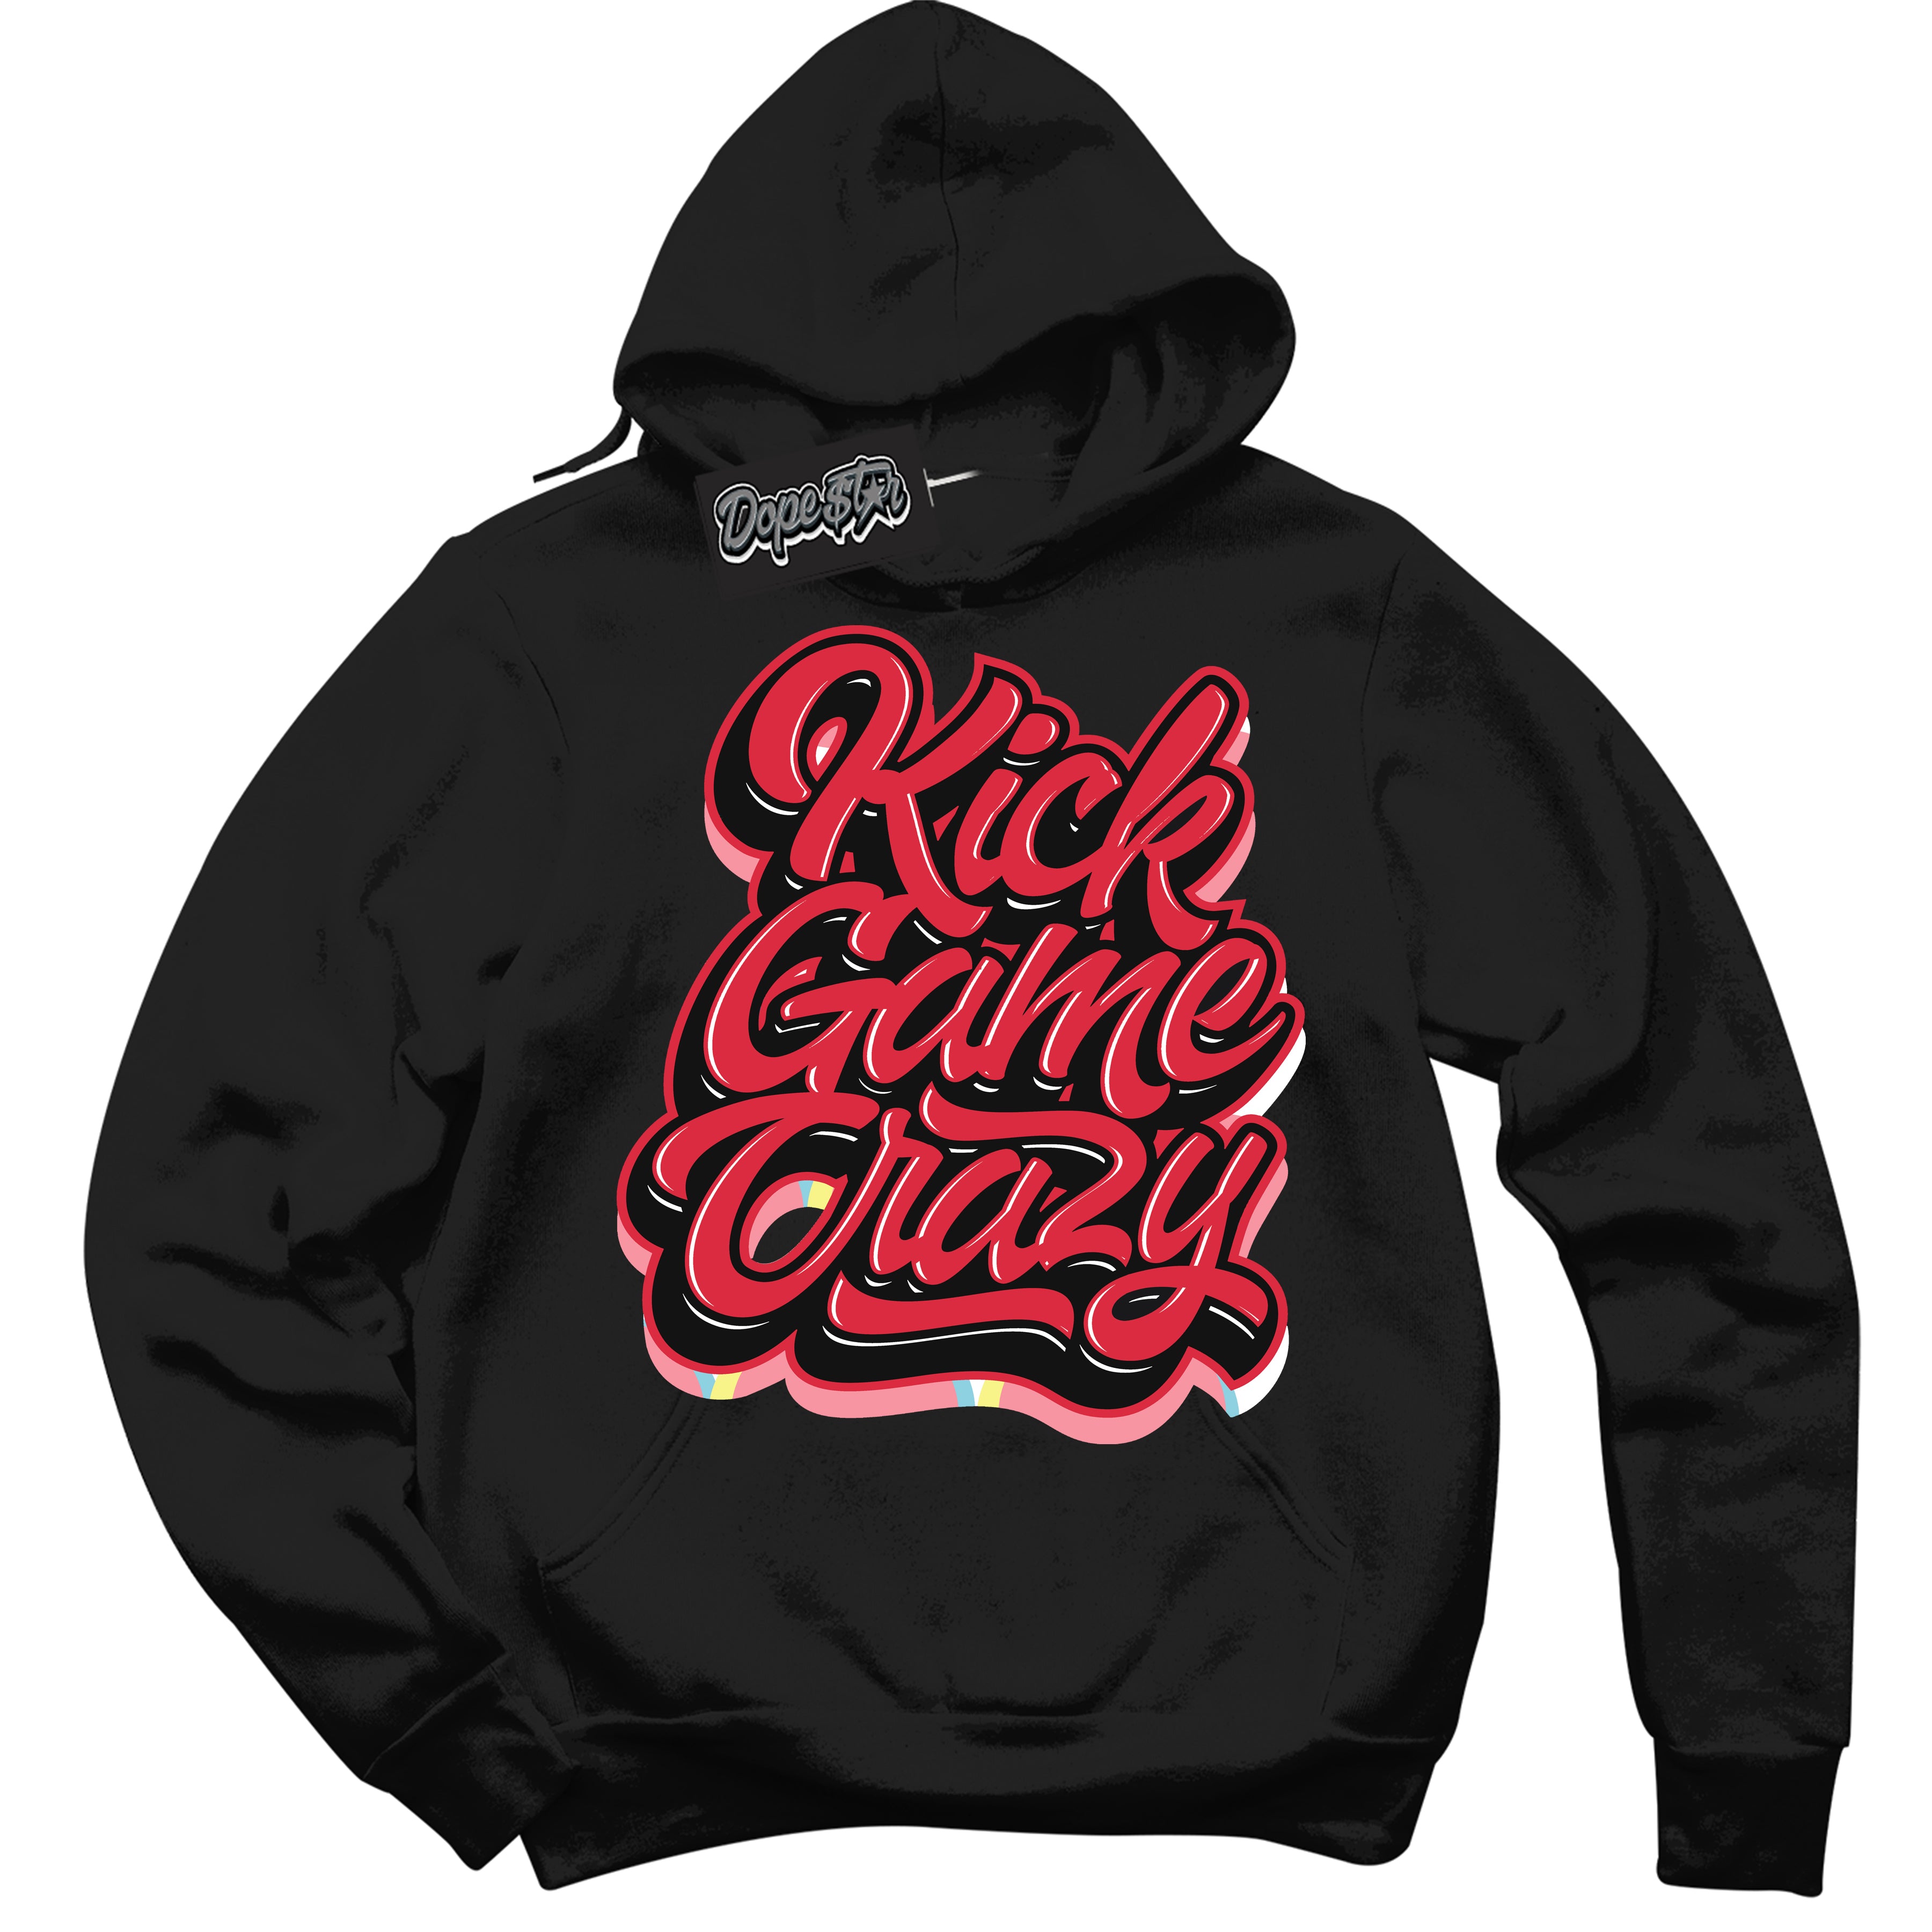 Cool Black Graphic DopeStar Hoodie with “ Kick Game Crazy “ print, that perfectly matches Spider-Verse 1s sneakers